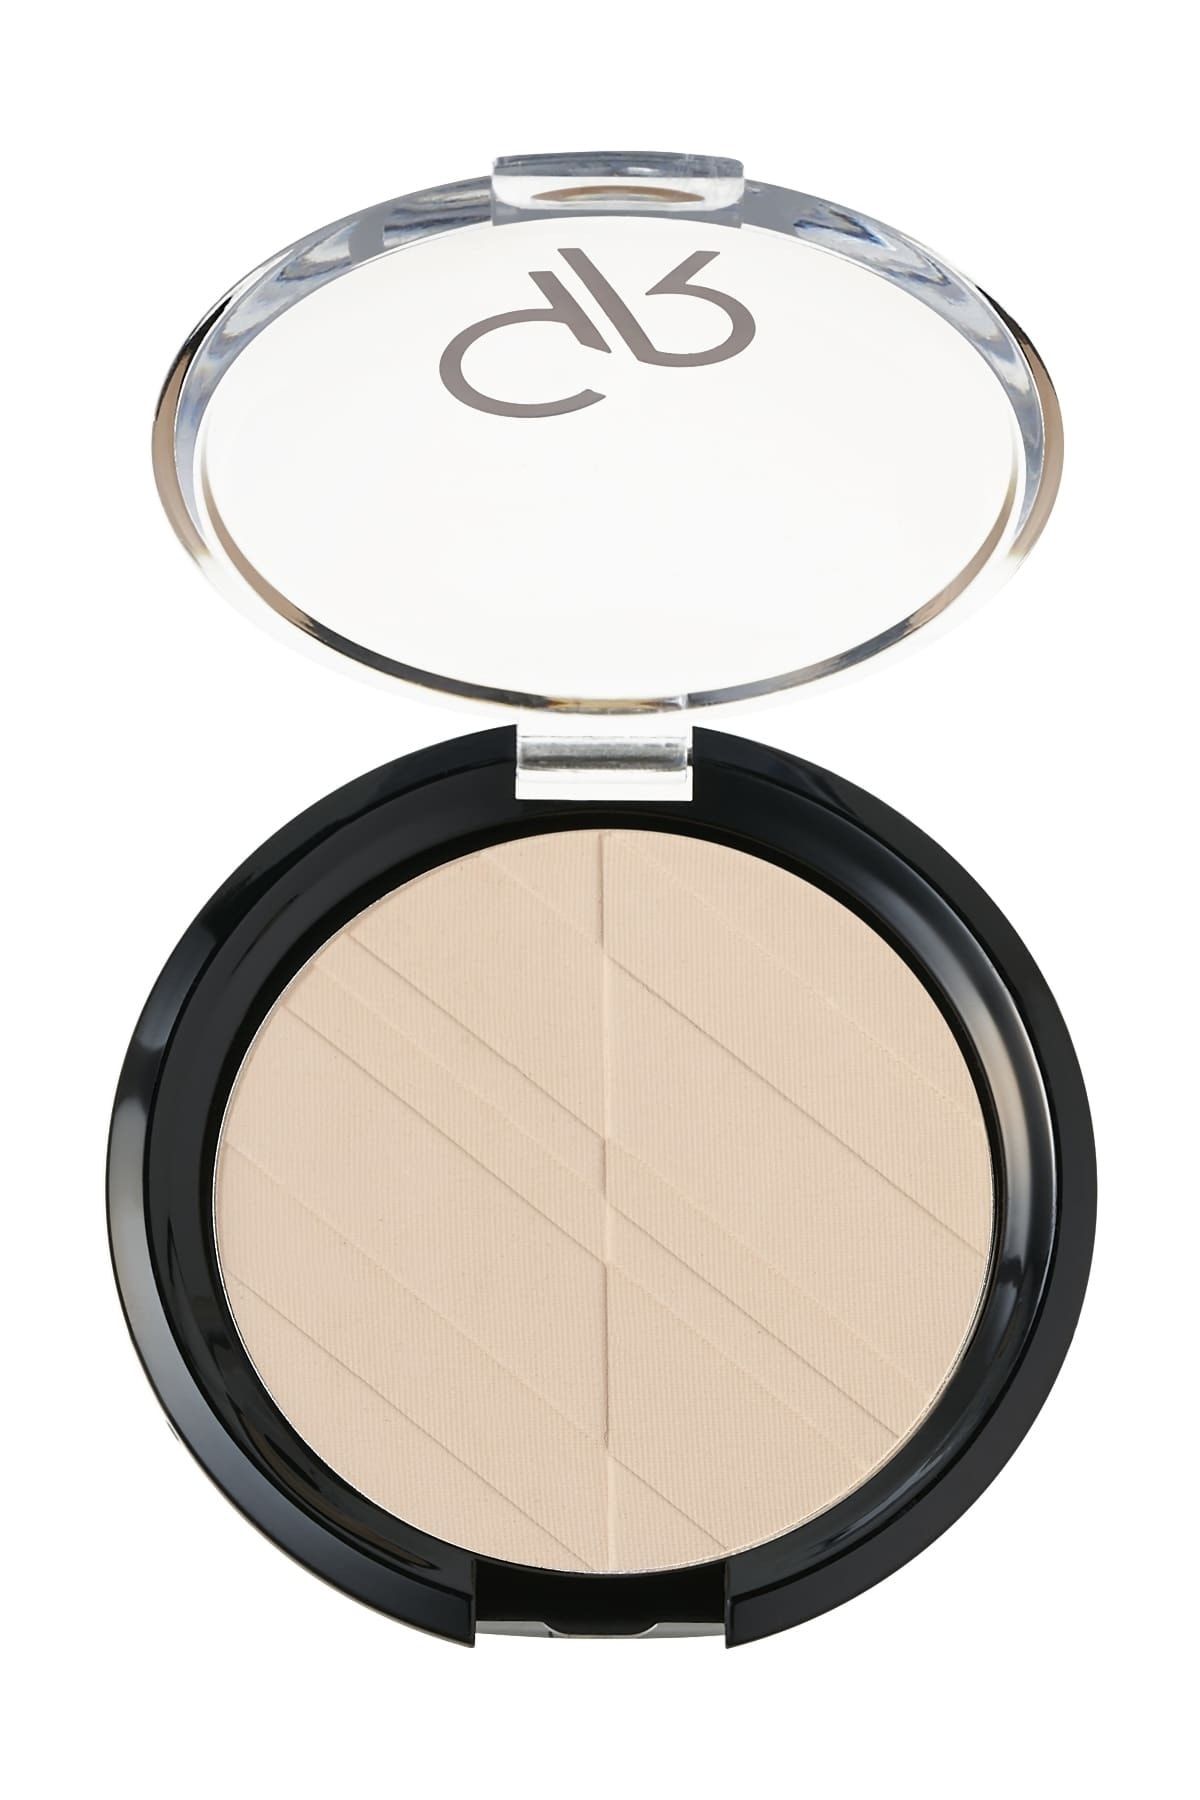 Golden Rose Pudra - Silky Touch Compact Powder No: 03 8691190115036